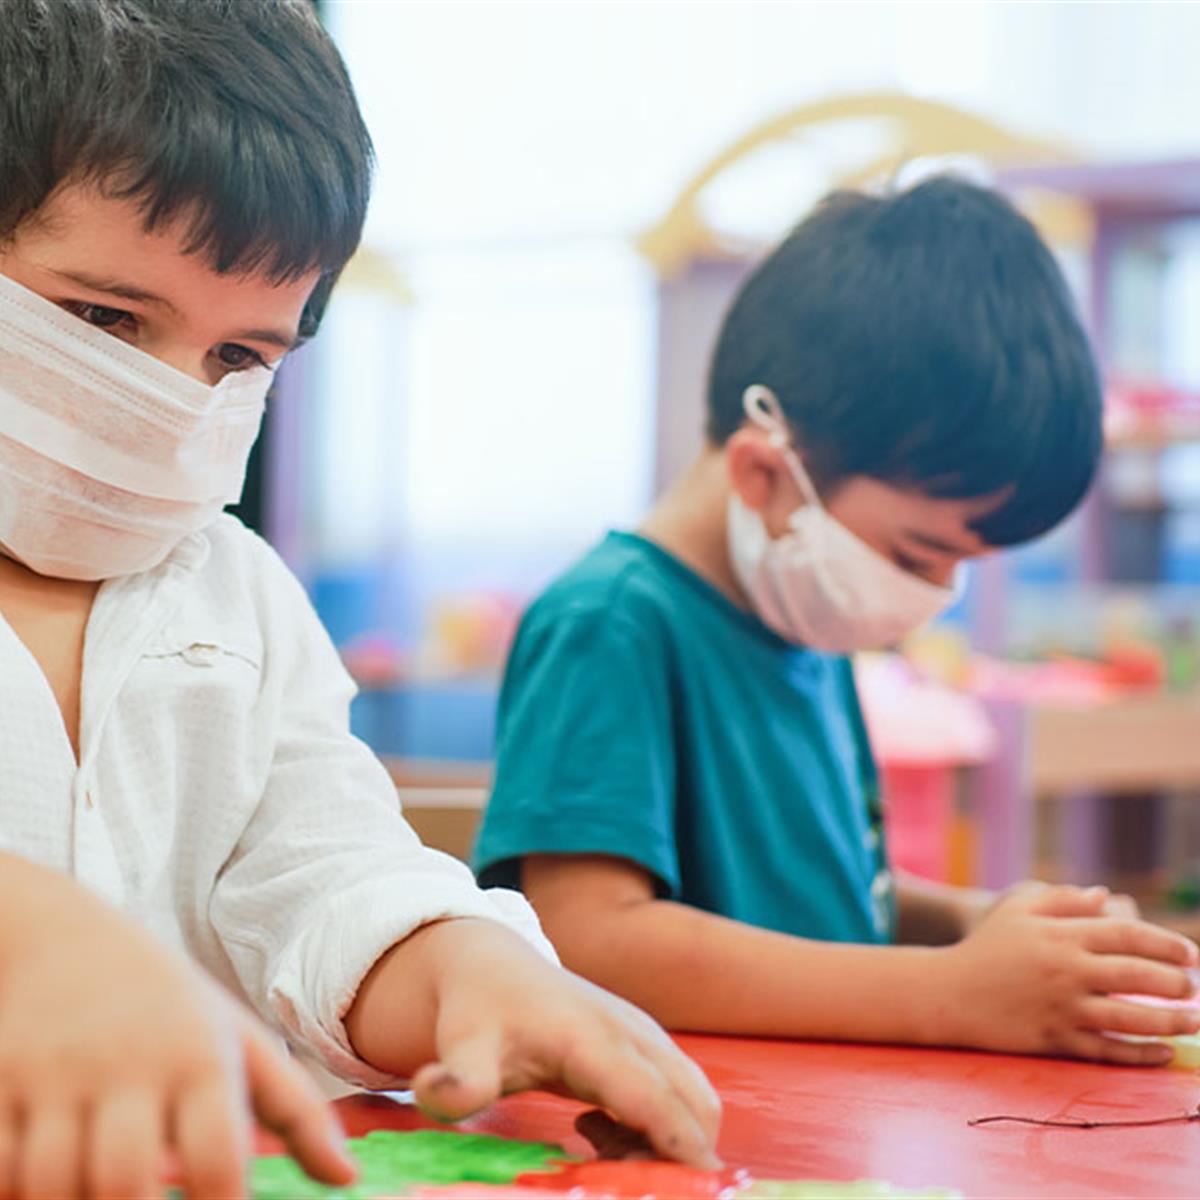 Masks Not Recommended For Children Below 5 Years, Says Revised Guidelines